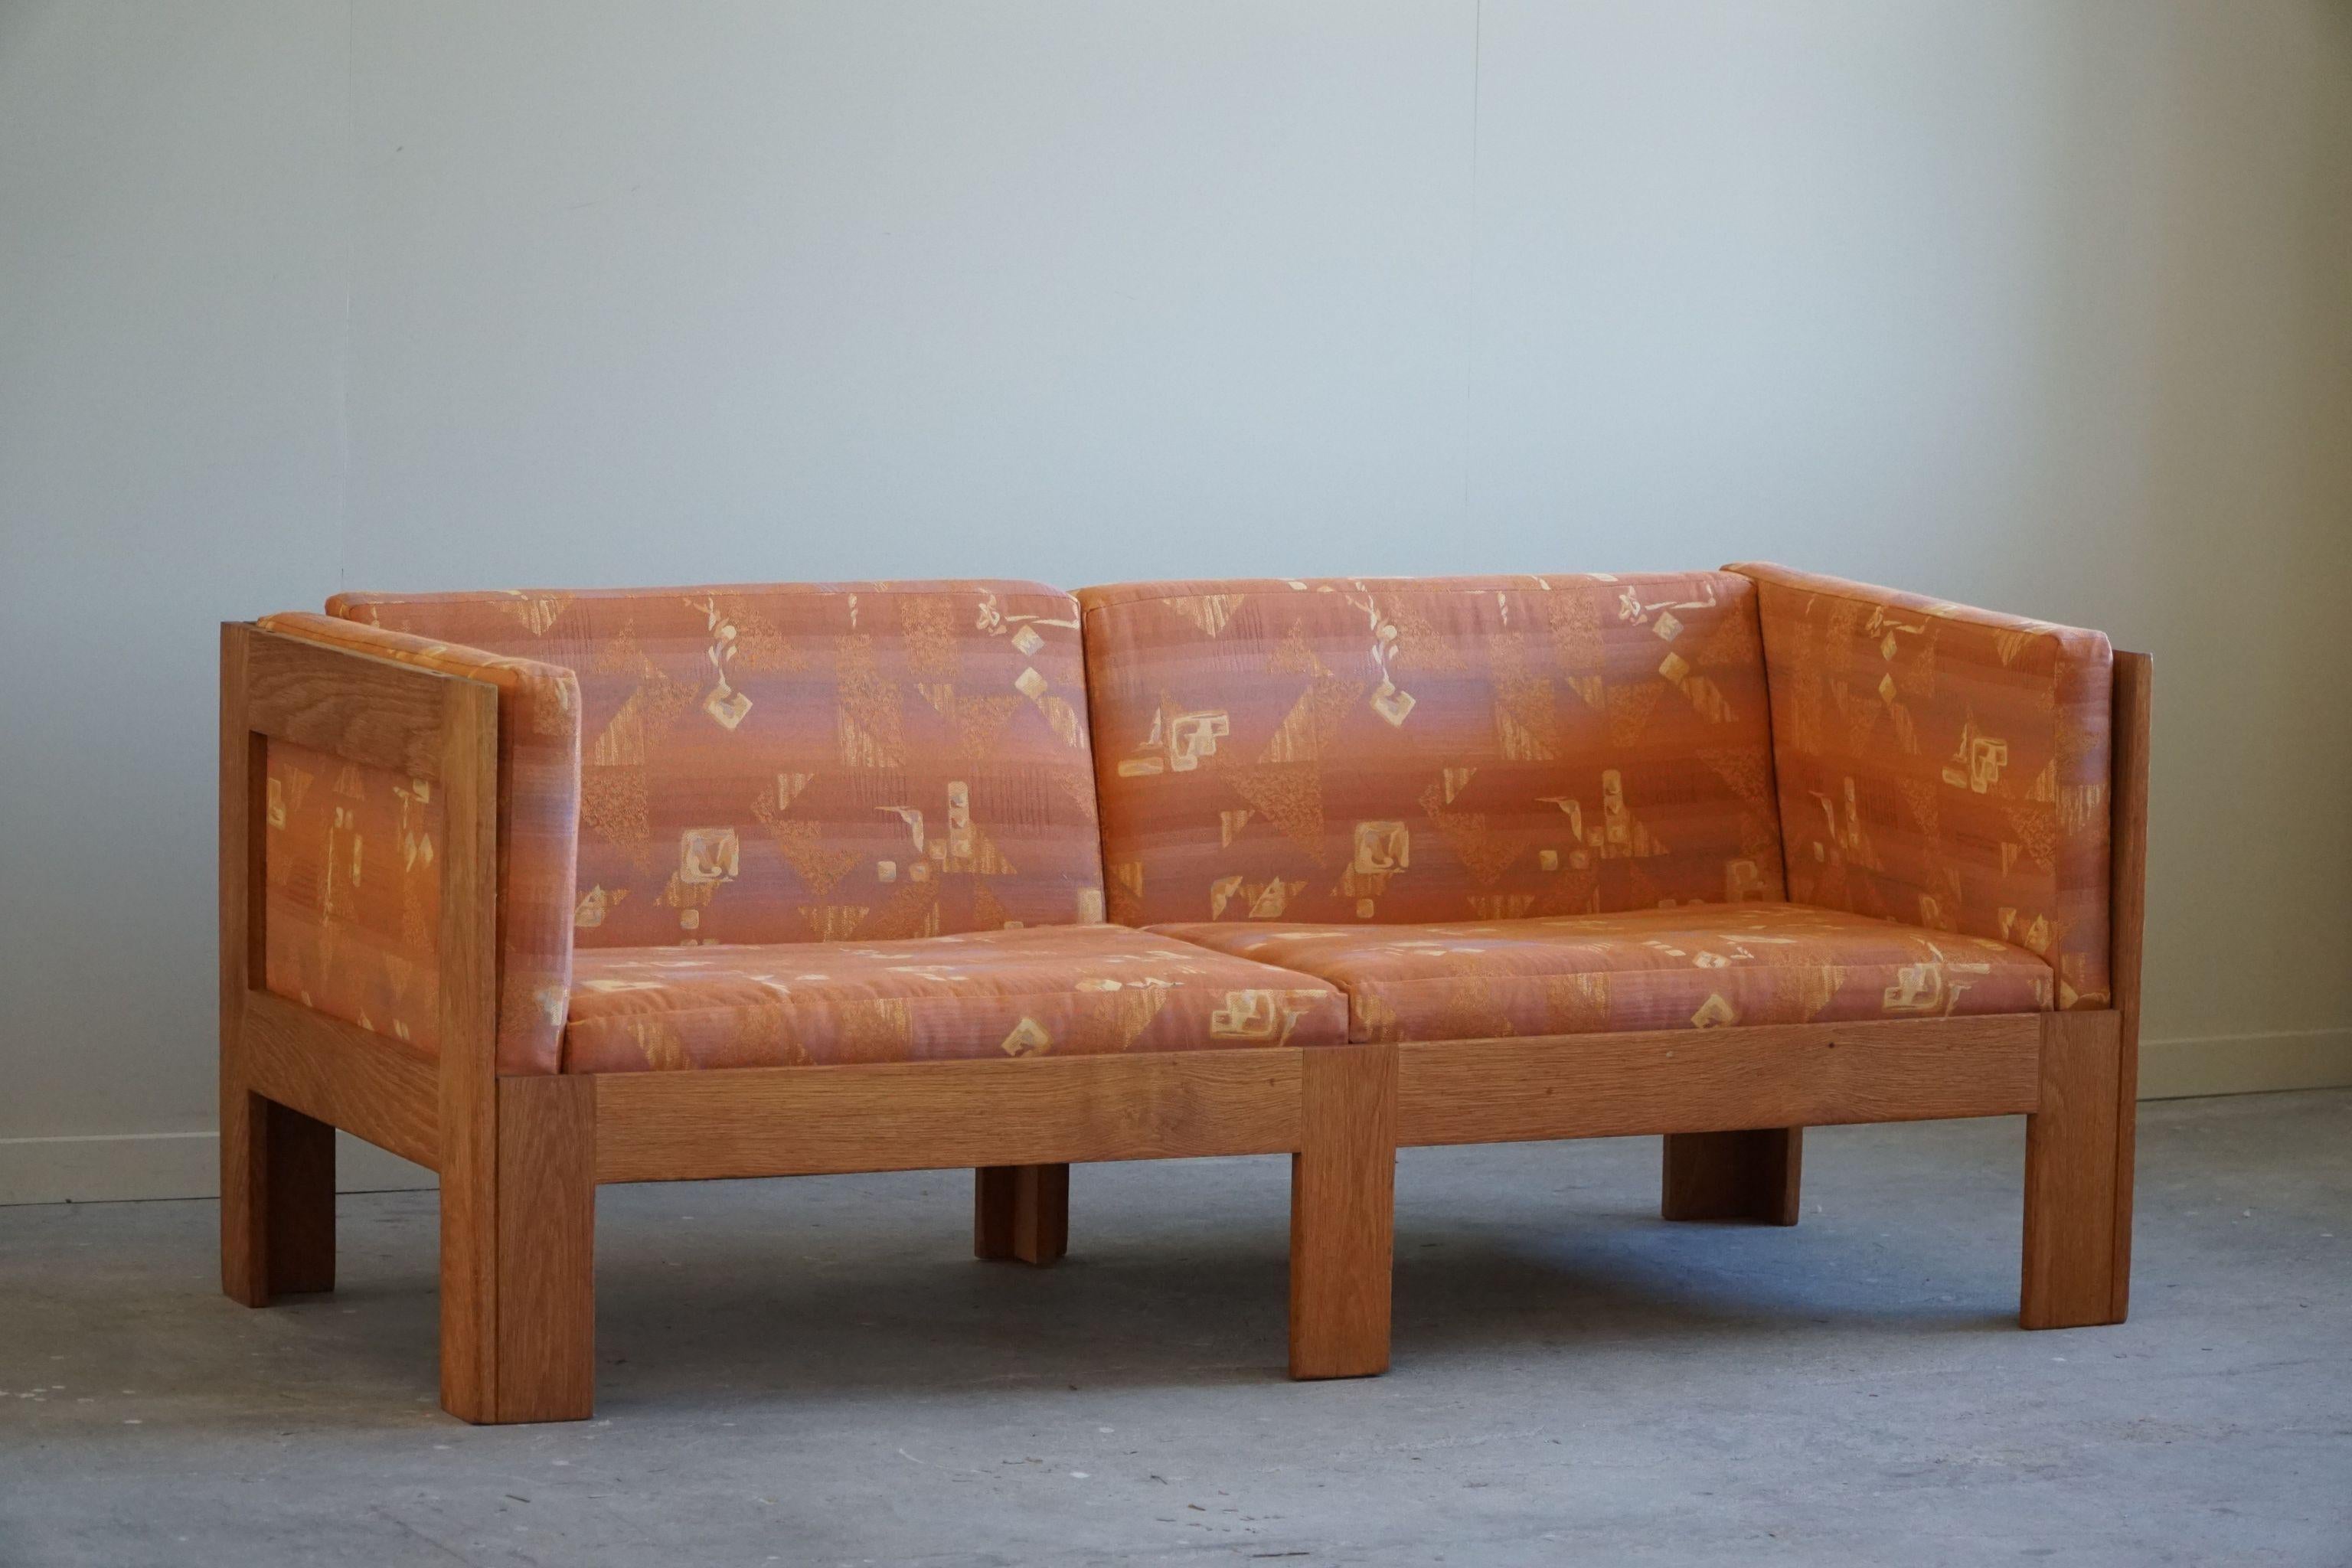 Danish Mid Century Two Seater Sofa in Oak, Reupholstered, by Tage Poulsen, 1960s For Sale 3